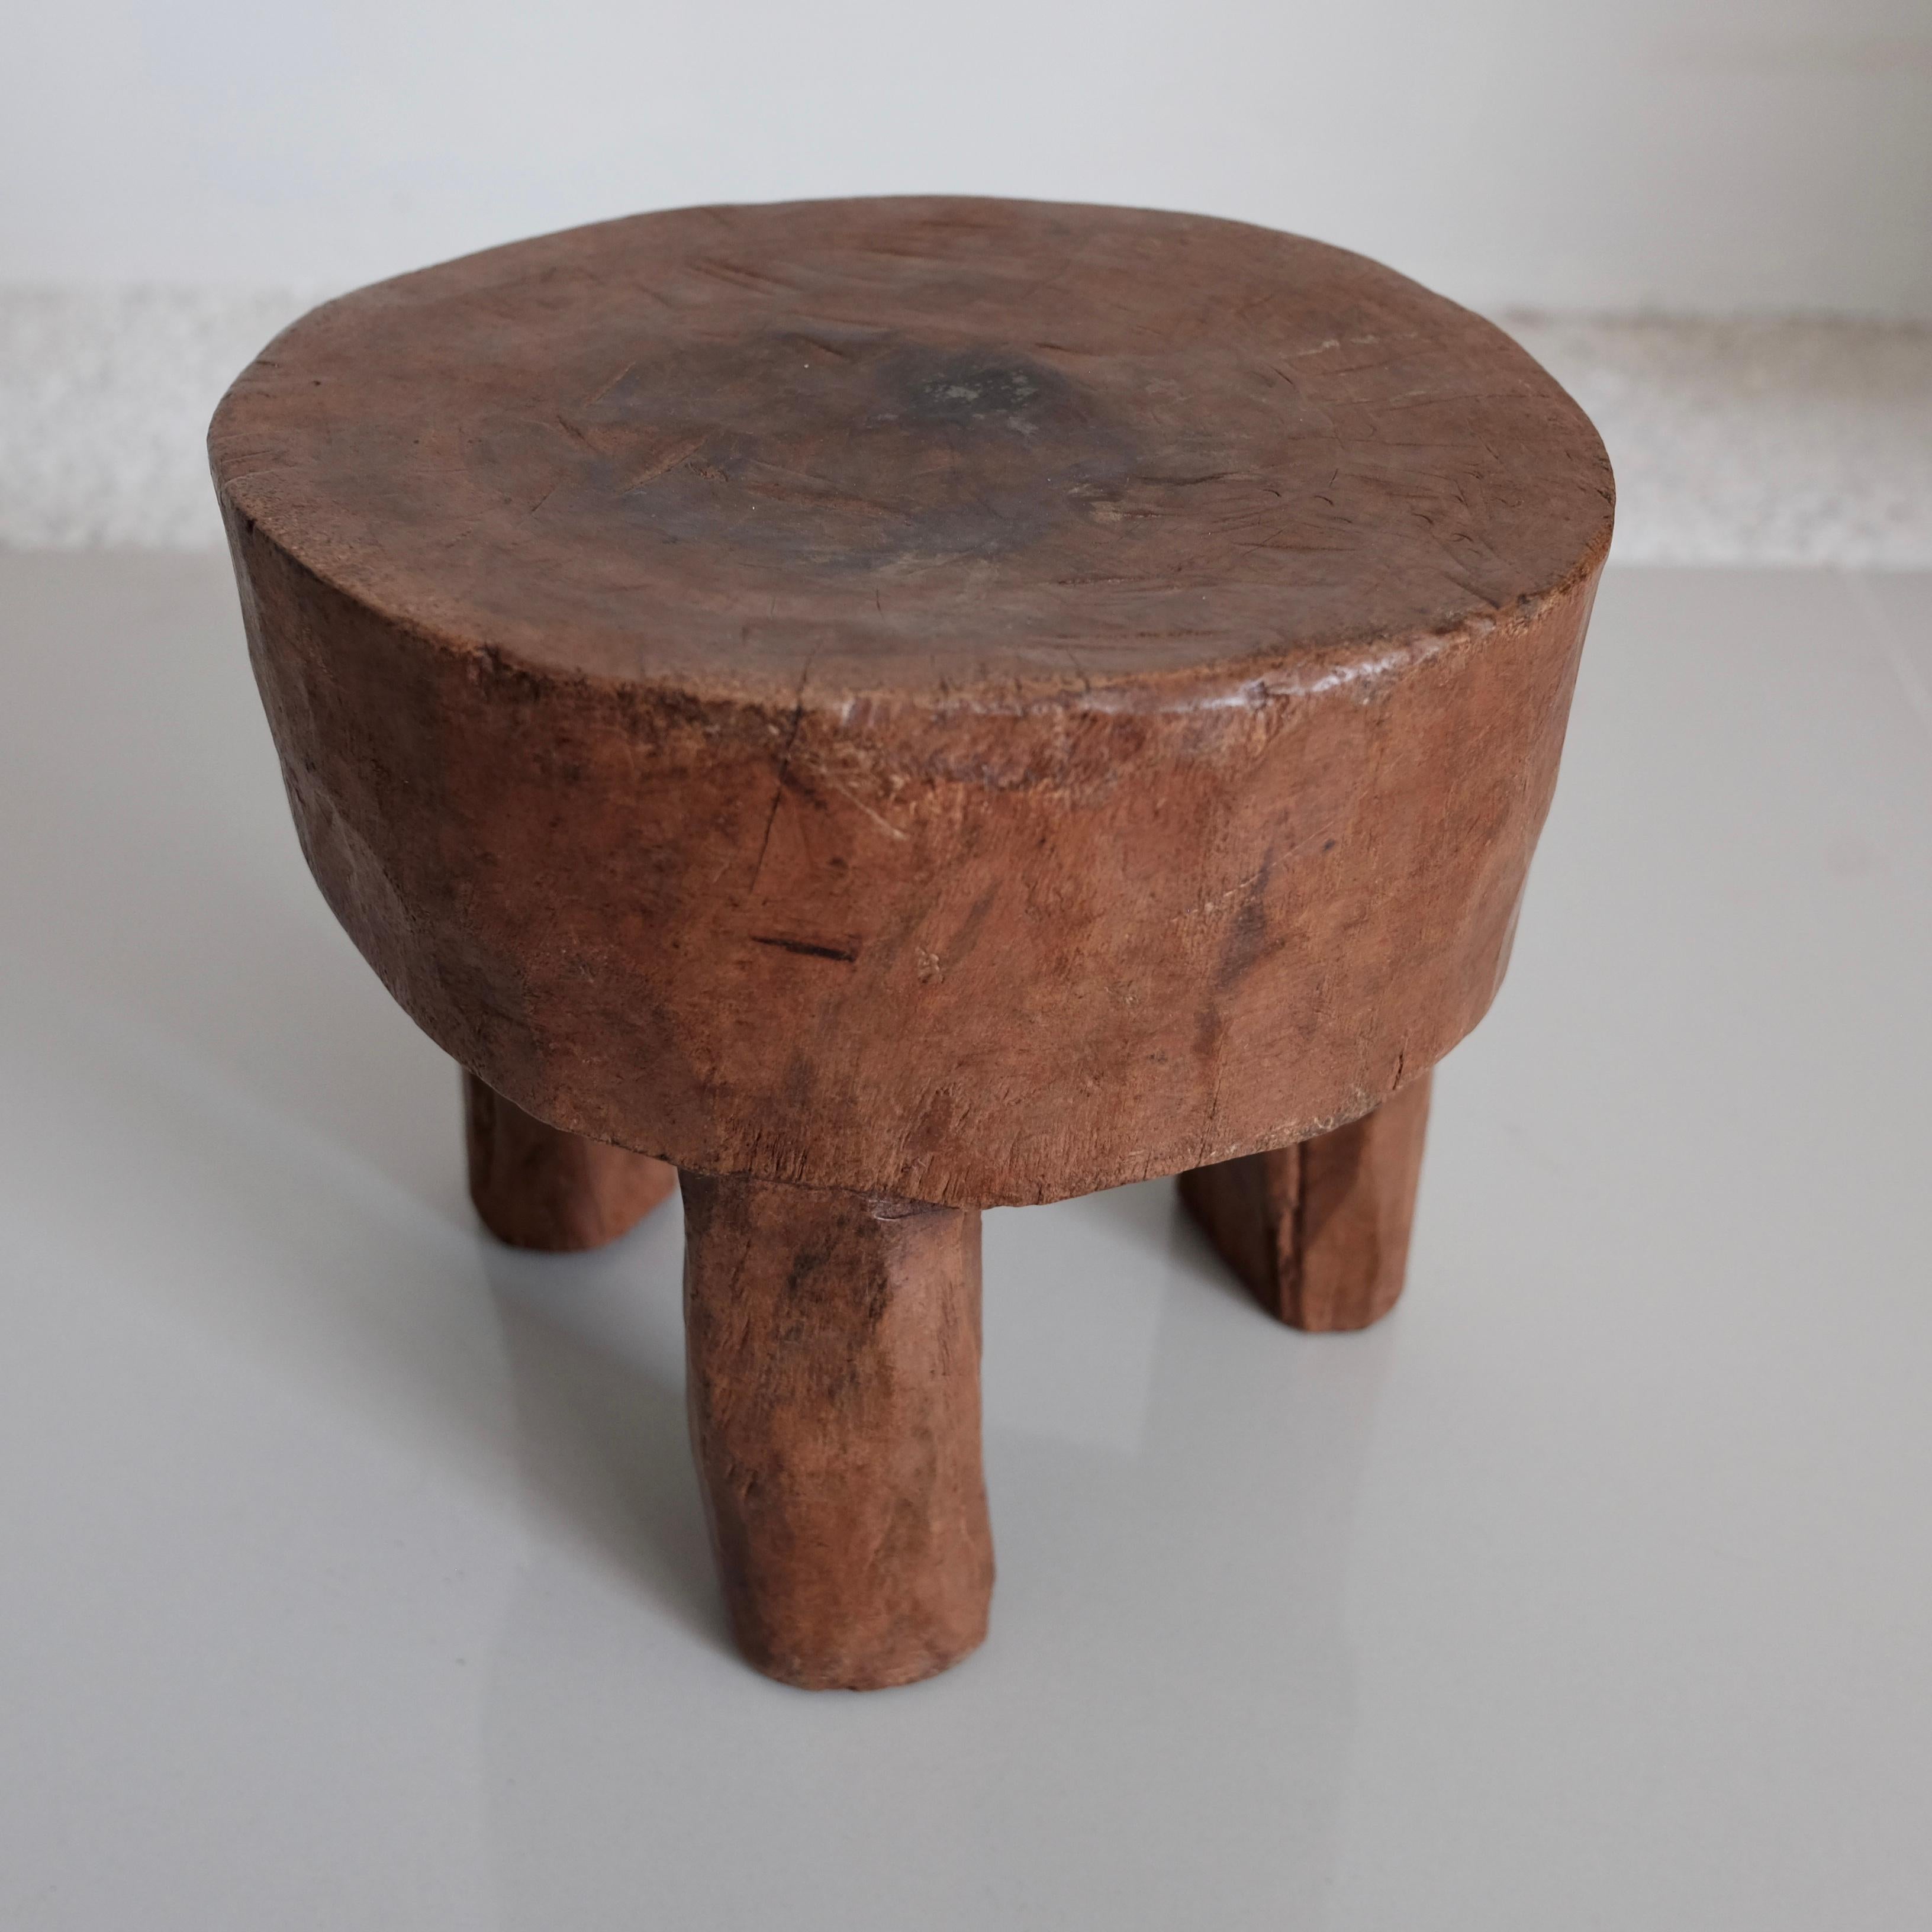 Hardwood, Primitive low stool hand carved by the Senufo, Cote d'Ivoire, Africa.